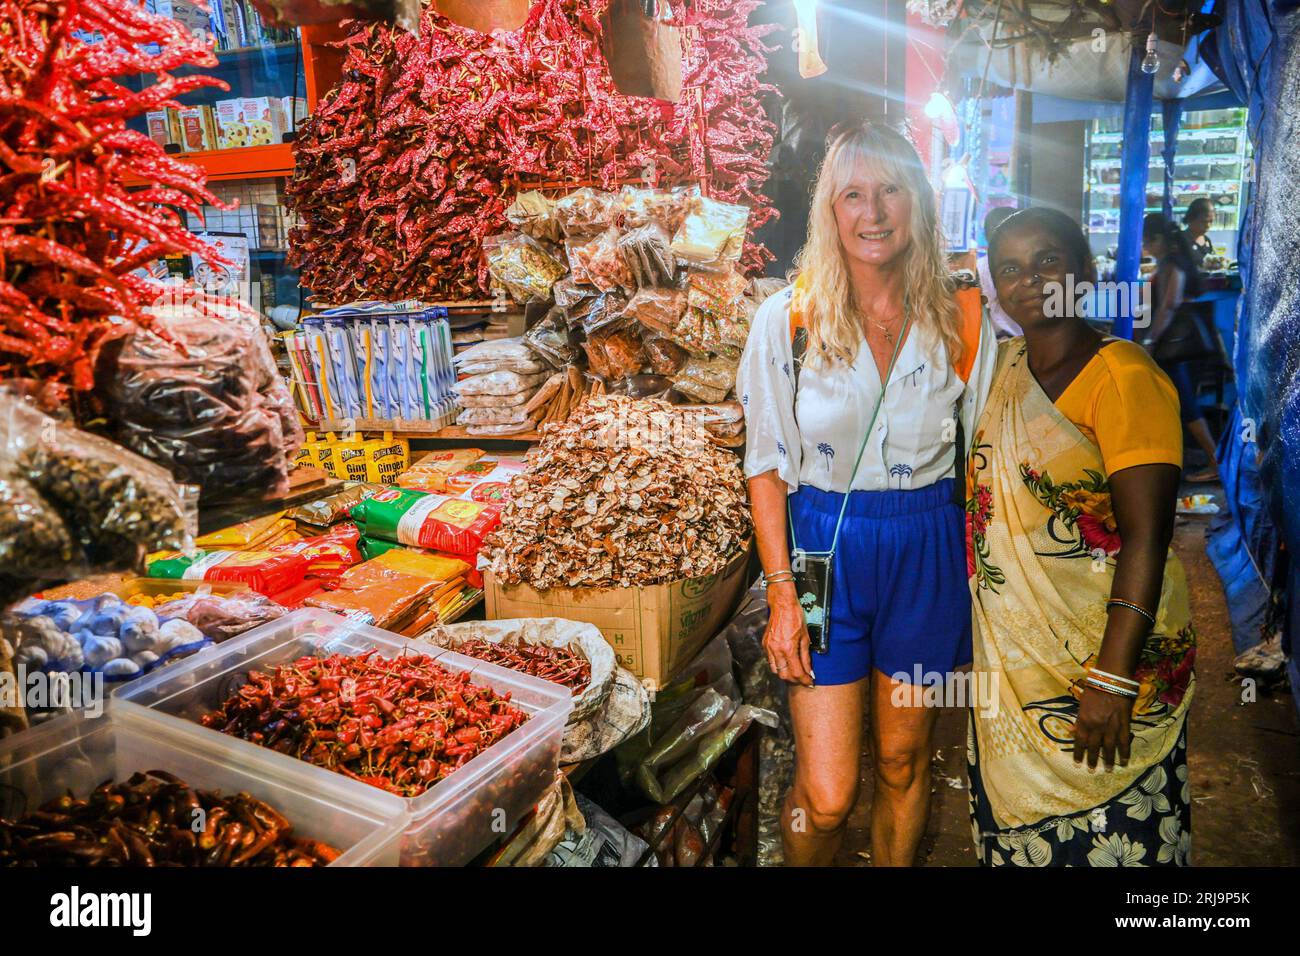 Margao, South Goa, India. 22nd Aug, 2023. a tourist poses with a local spice seller in the Narrow passage ways selling anything imaginable in the busy and colourful market at the city of Margao, South India.Paul Quezada-Neiman/Alamy Live News Credit: Paul Quezada-Neiman/Alamy Live News Stock Photo